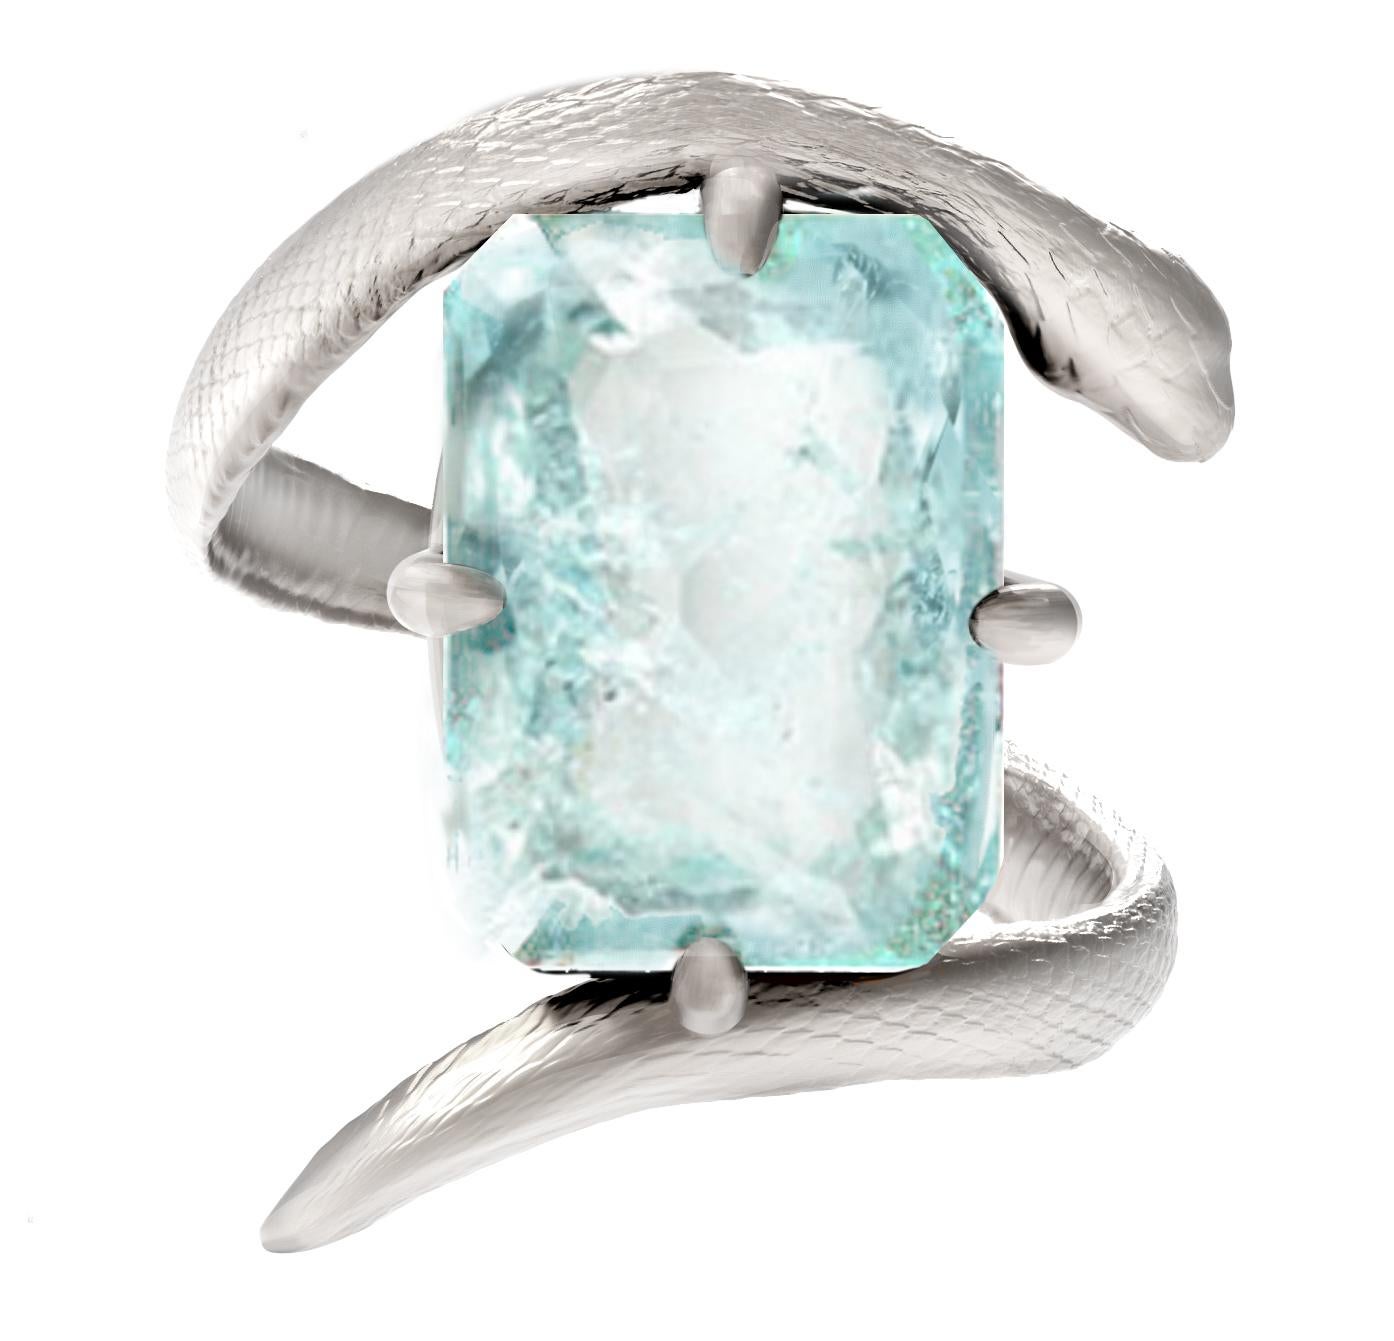 This contemporary engagement ring is made of 18 karat white gold and features a natural untreated sky blue paraiba tourmaline, weighing 5.16 carats, and a cushion cut measuring 13x9 mm. The ring belongs to the Mesopotamian collection and can be